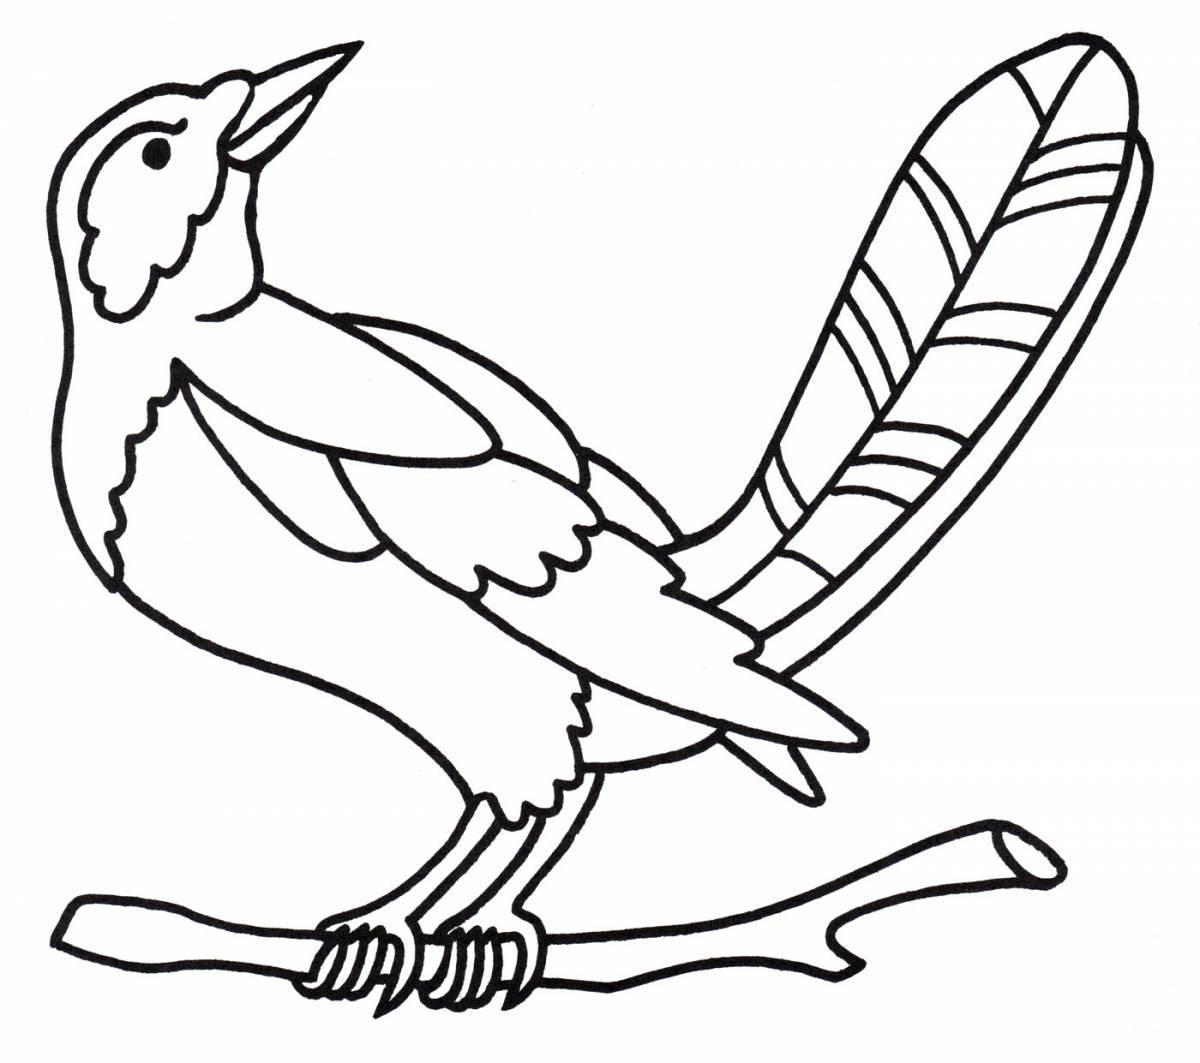 Amazing magpie coloring page for kids